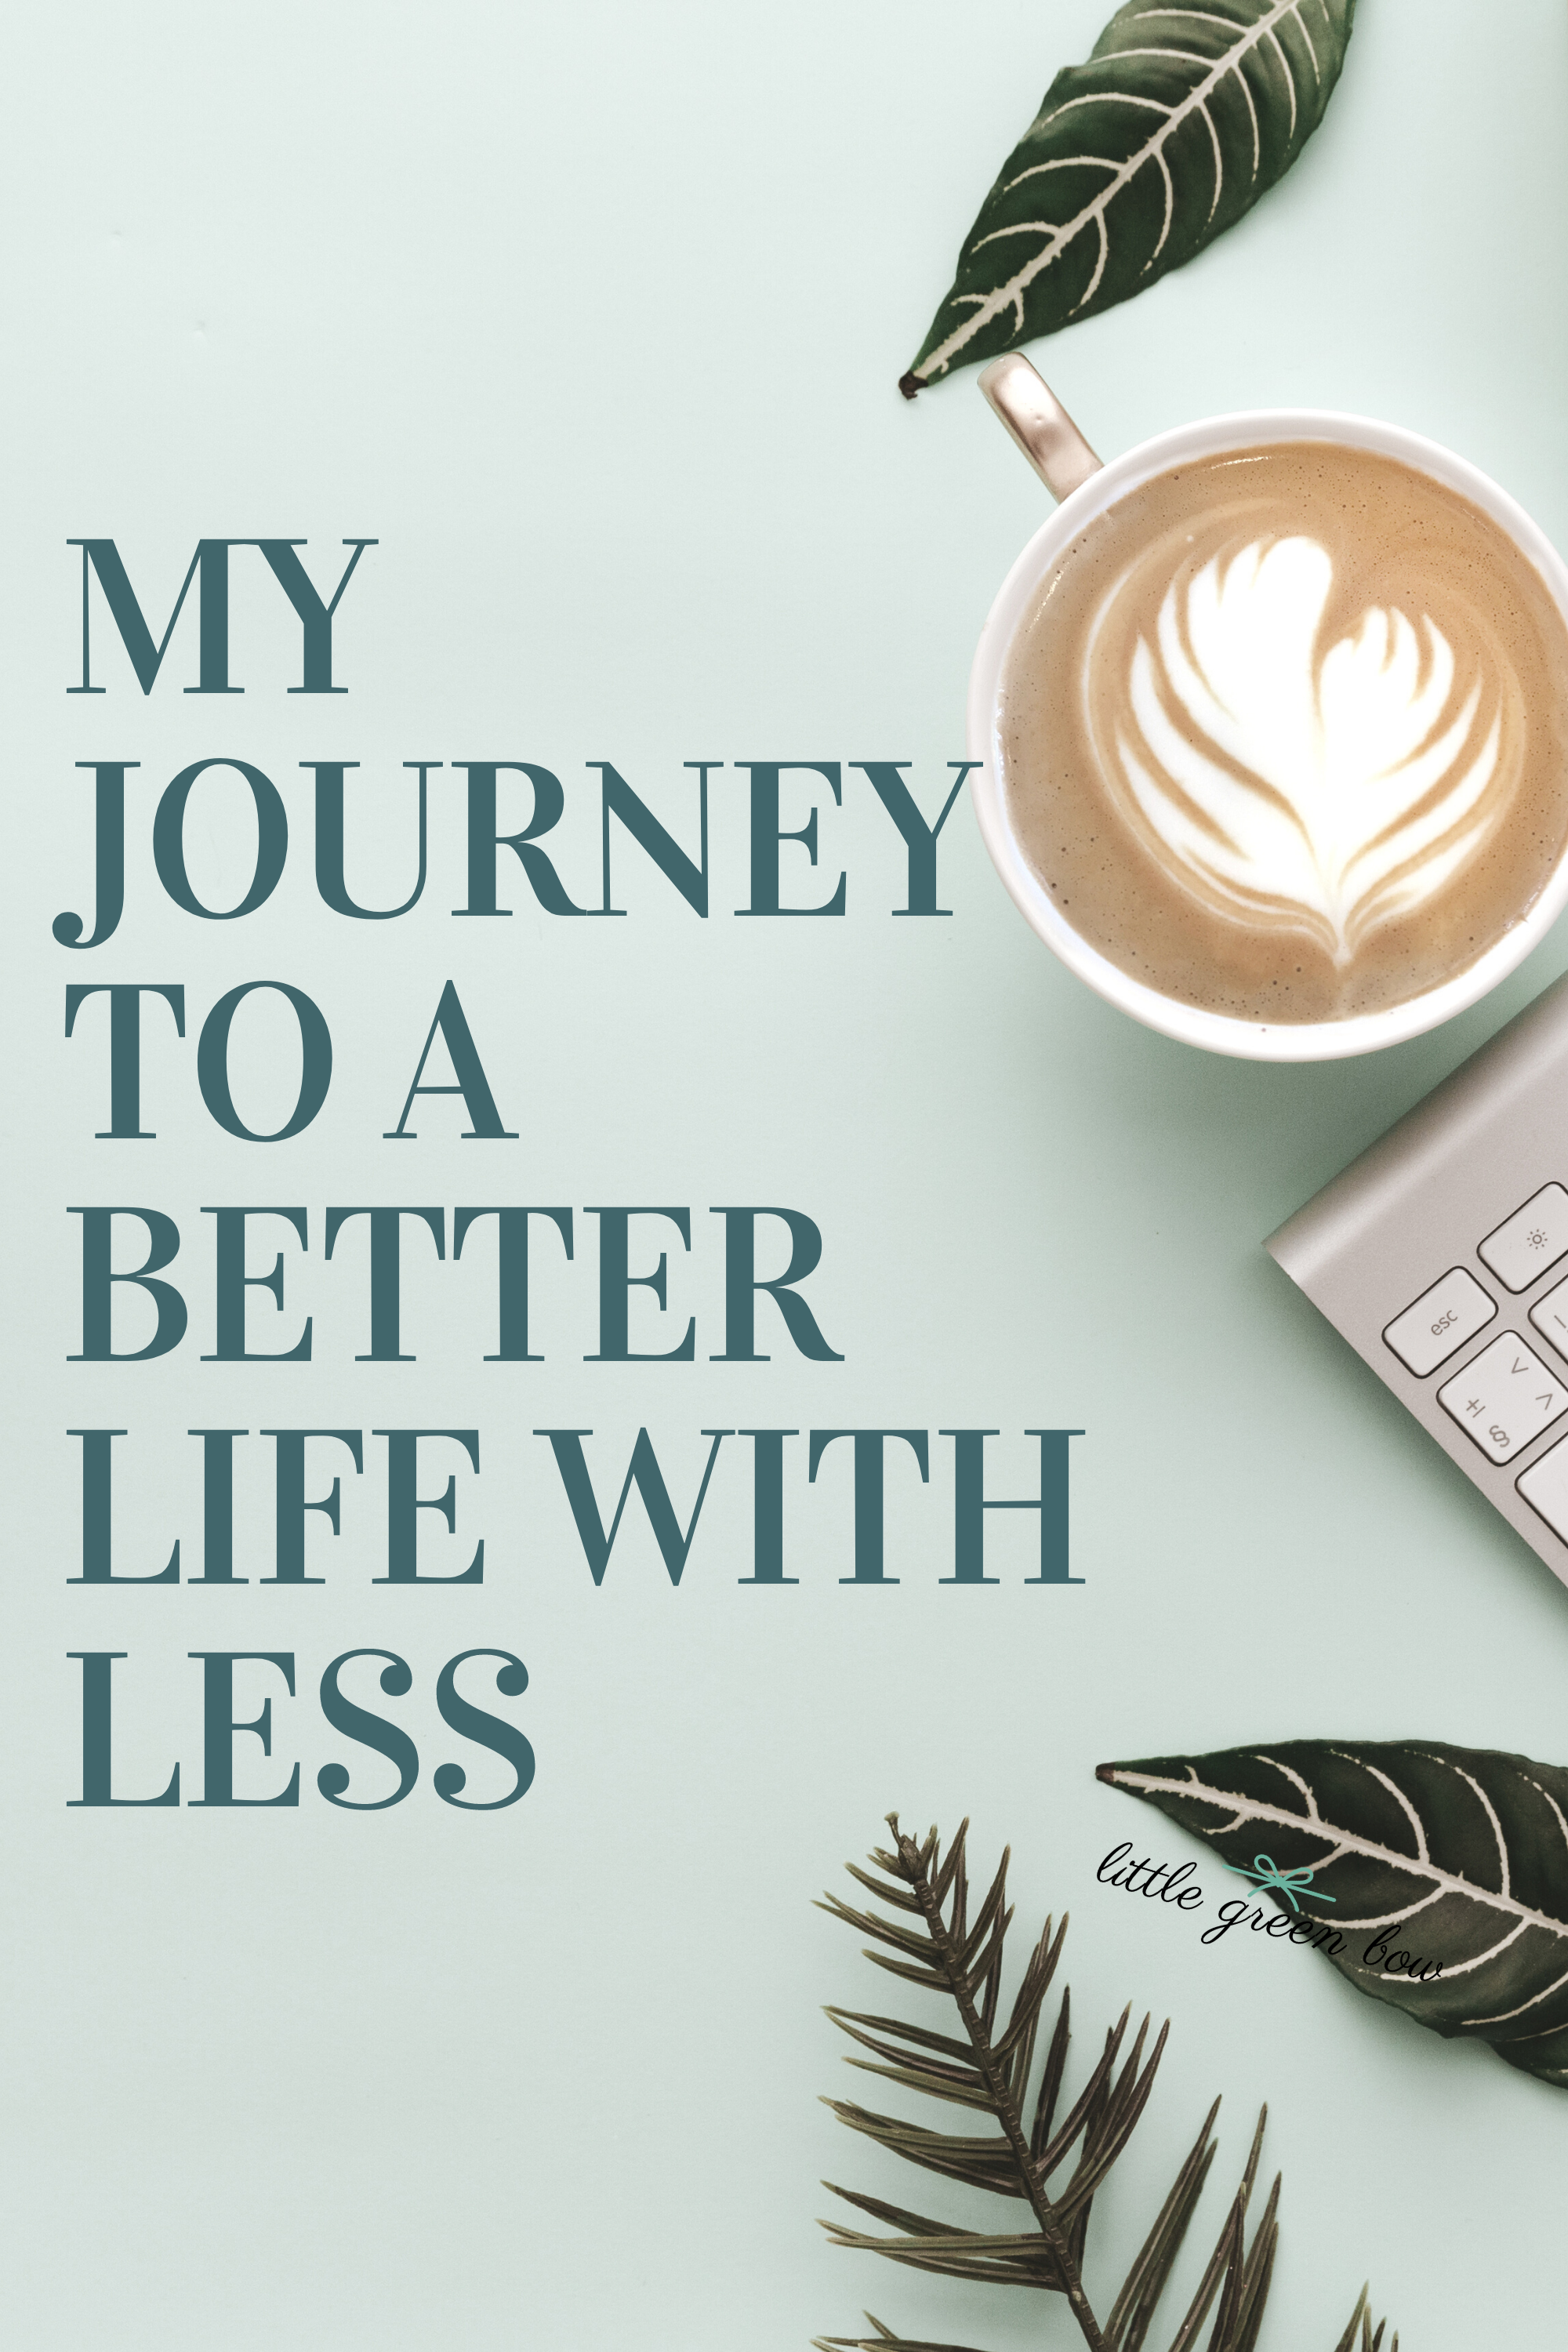 My Journey to a Better Life with Less